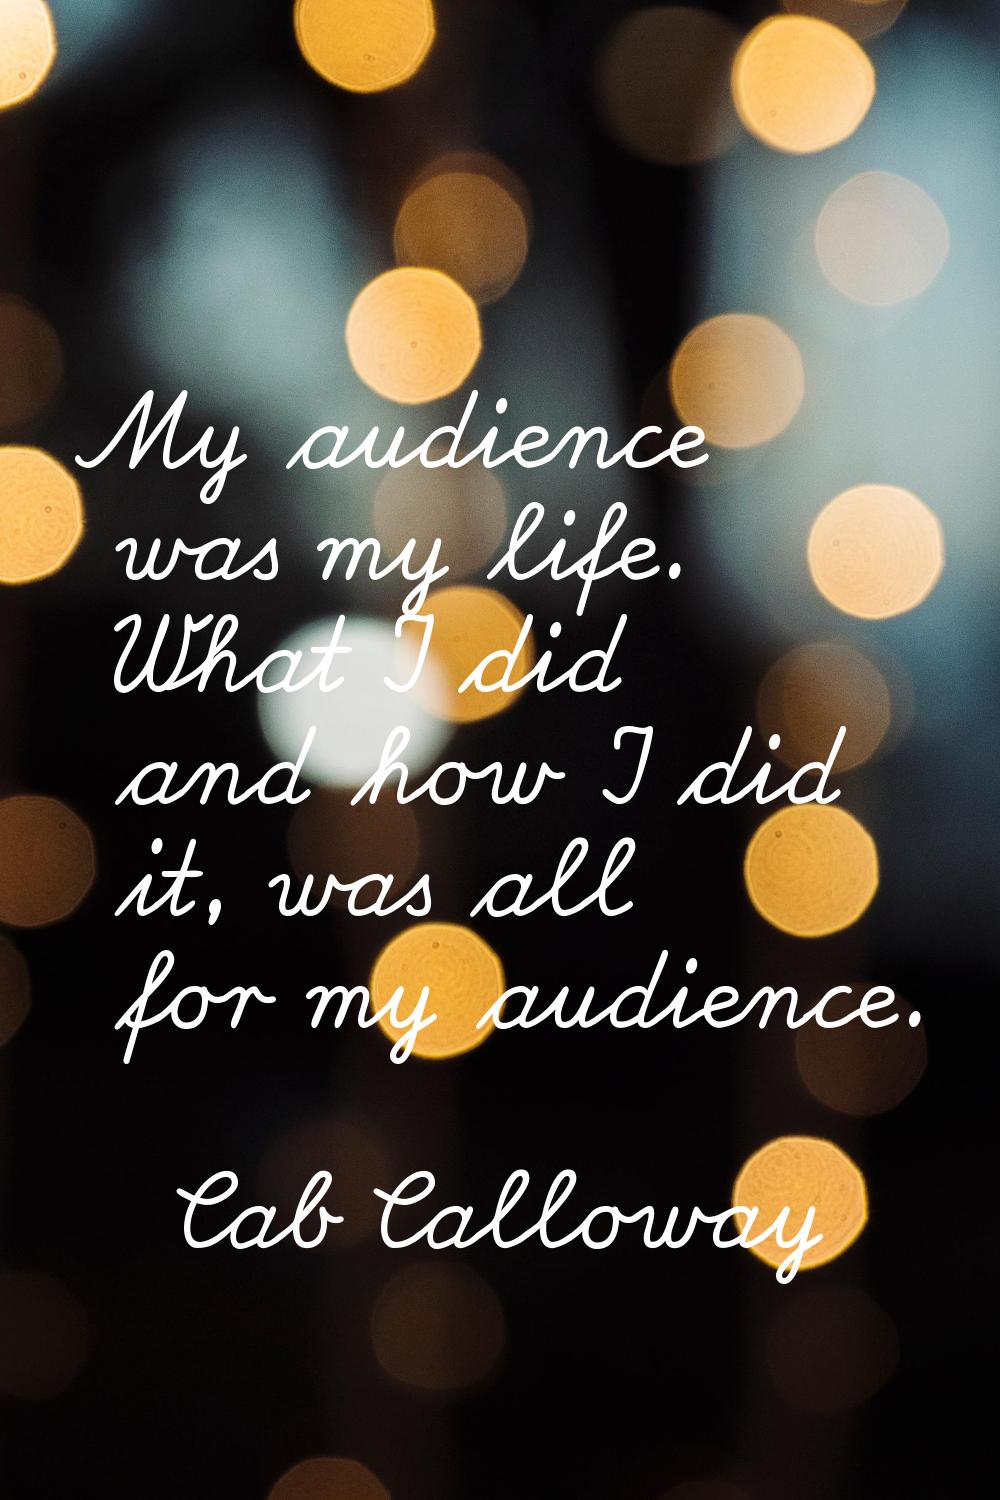 My audience was my life. What I did and how I did it, was all for my audience.